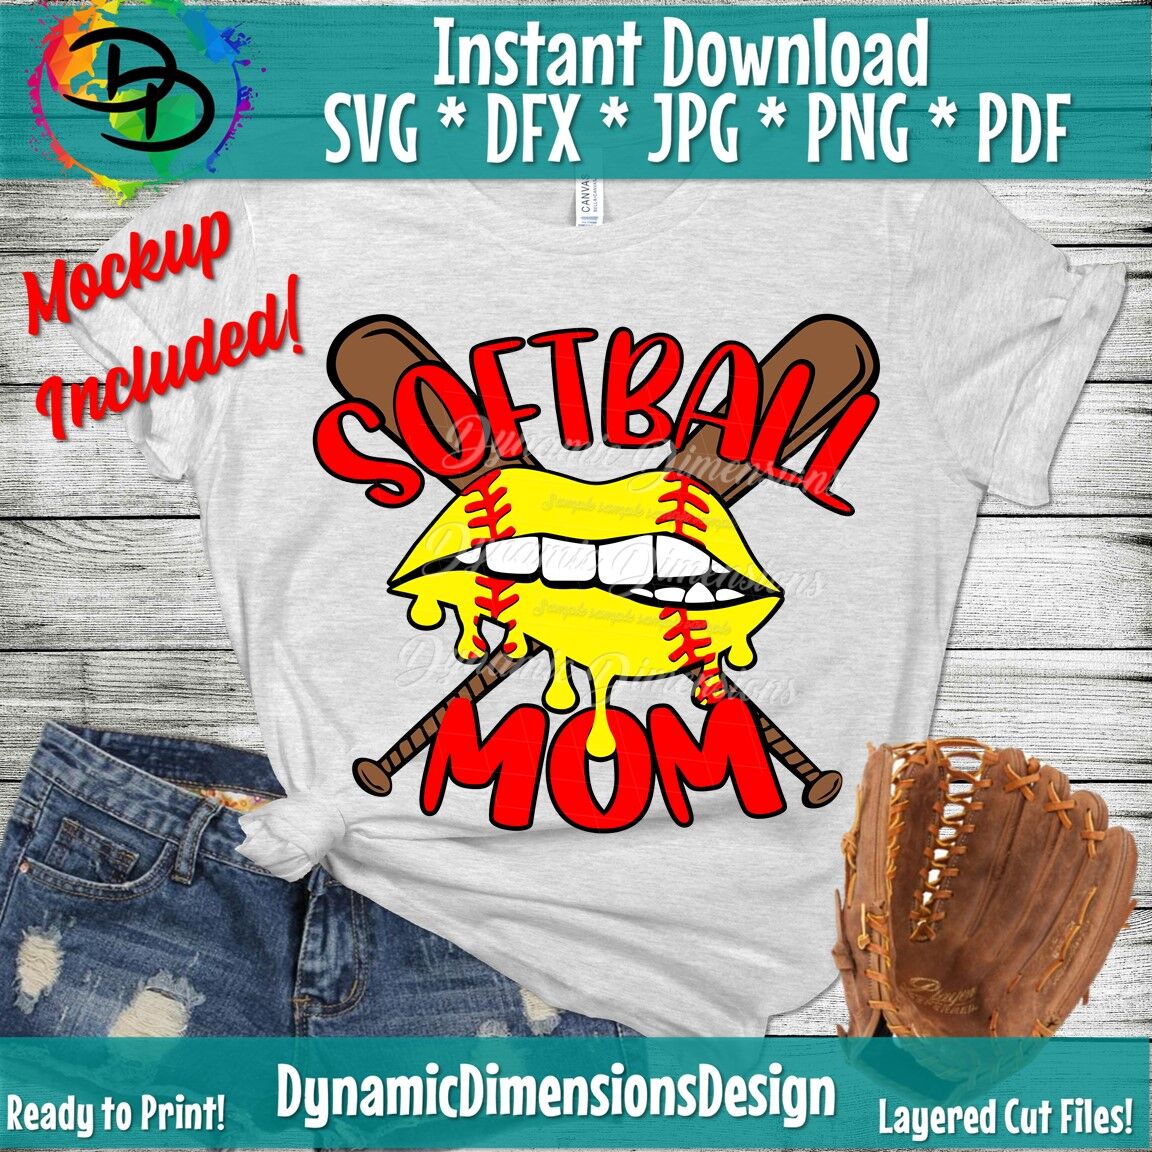 Baseball and Softball Jersey Clip Art Instant Download SVG 